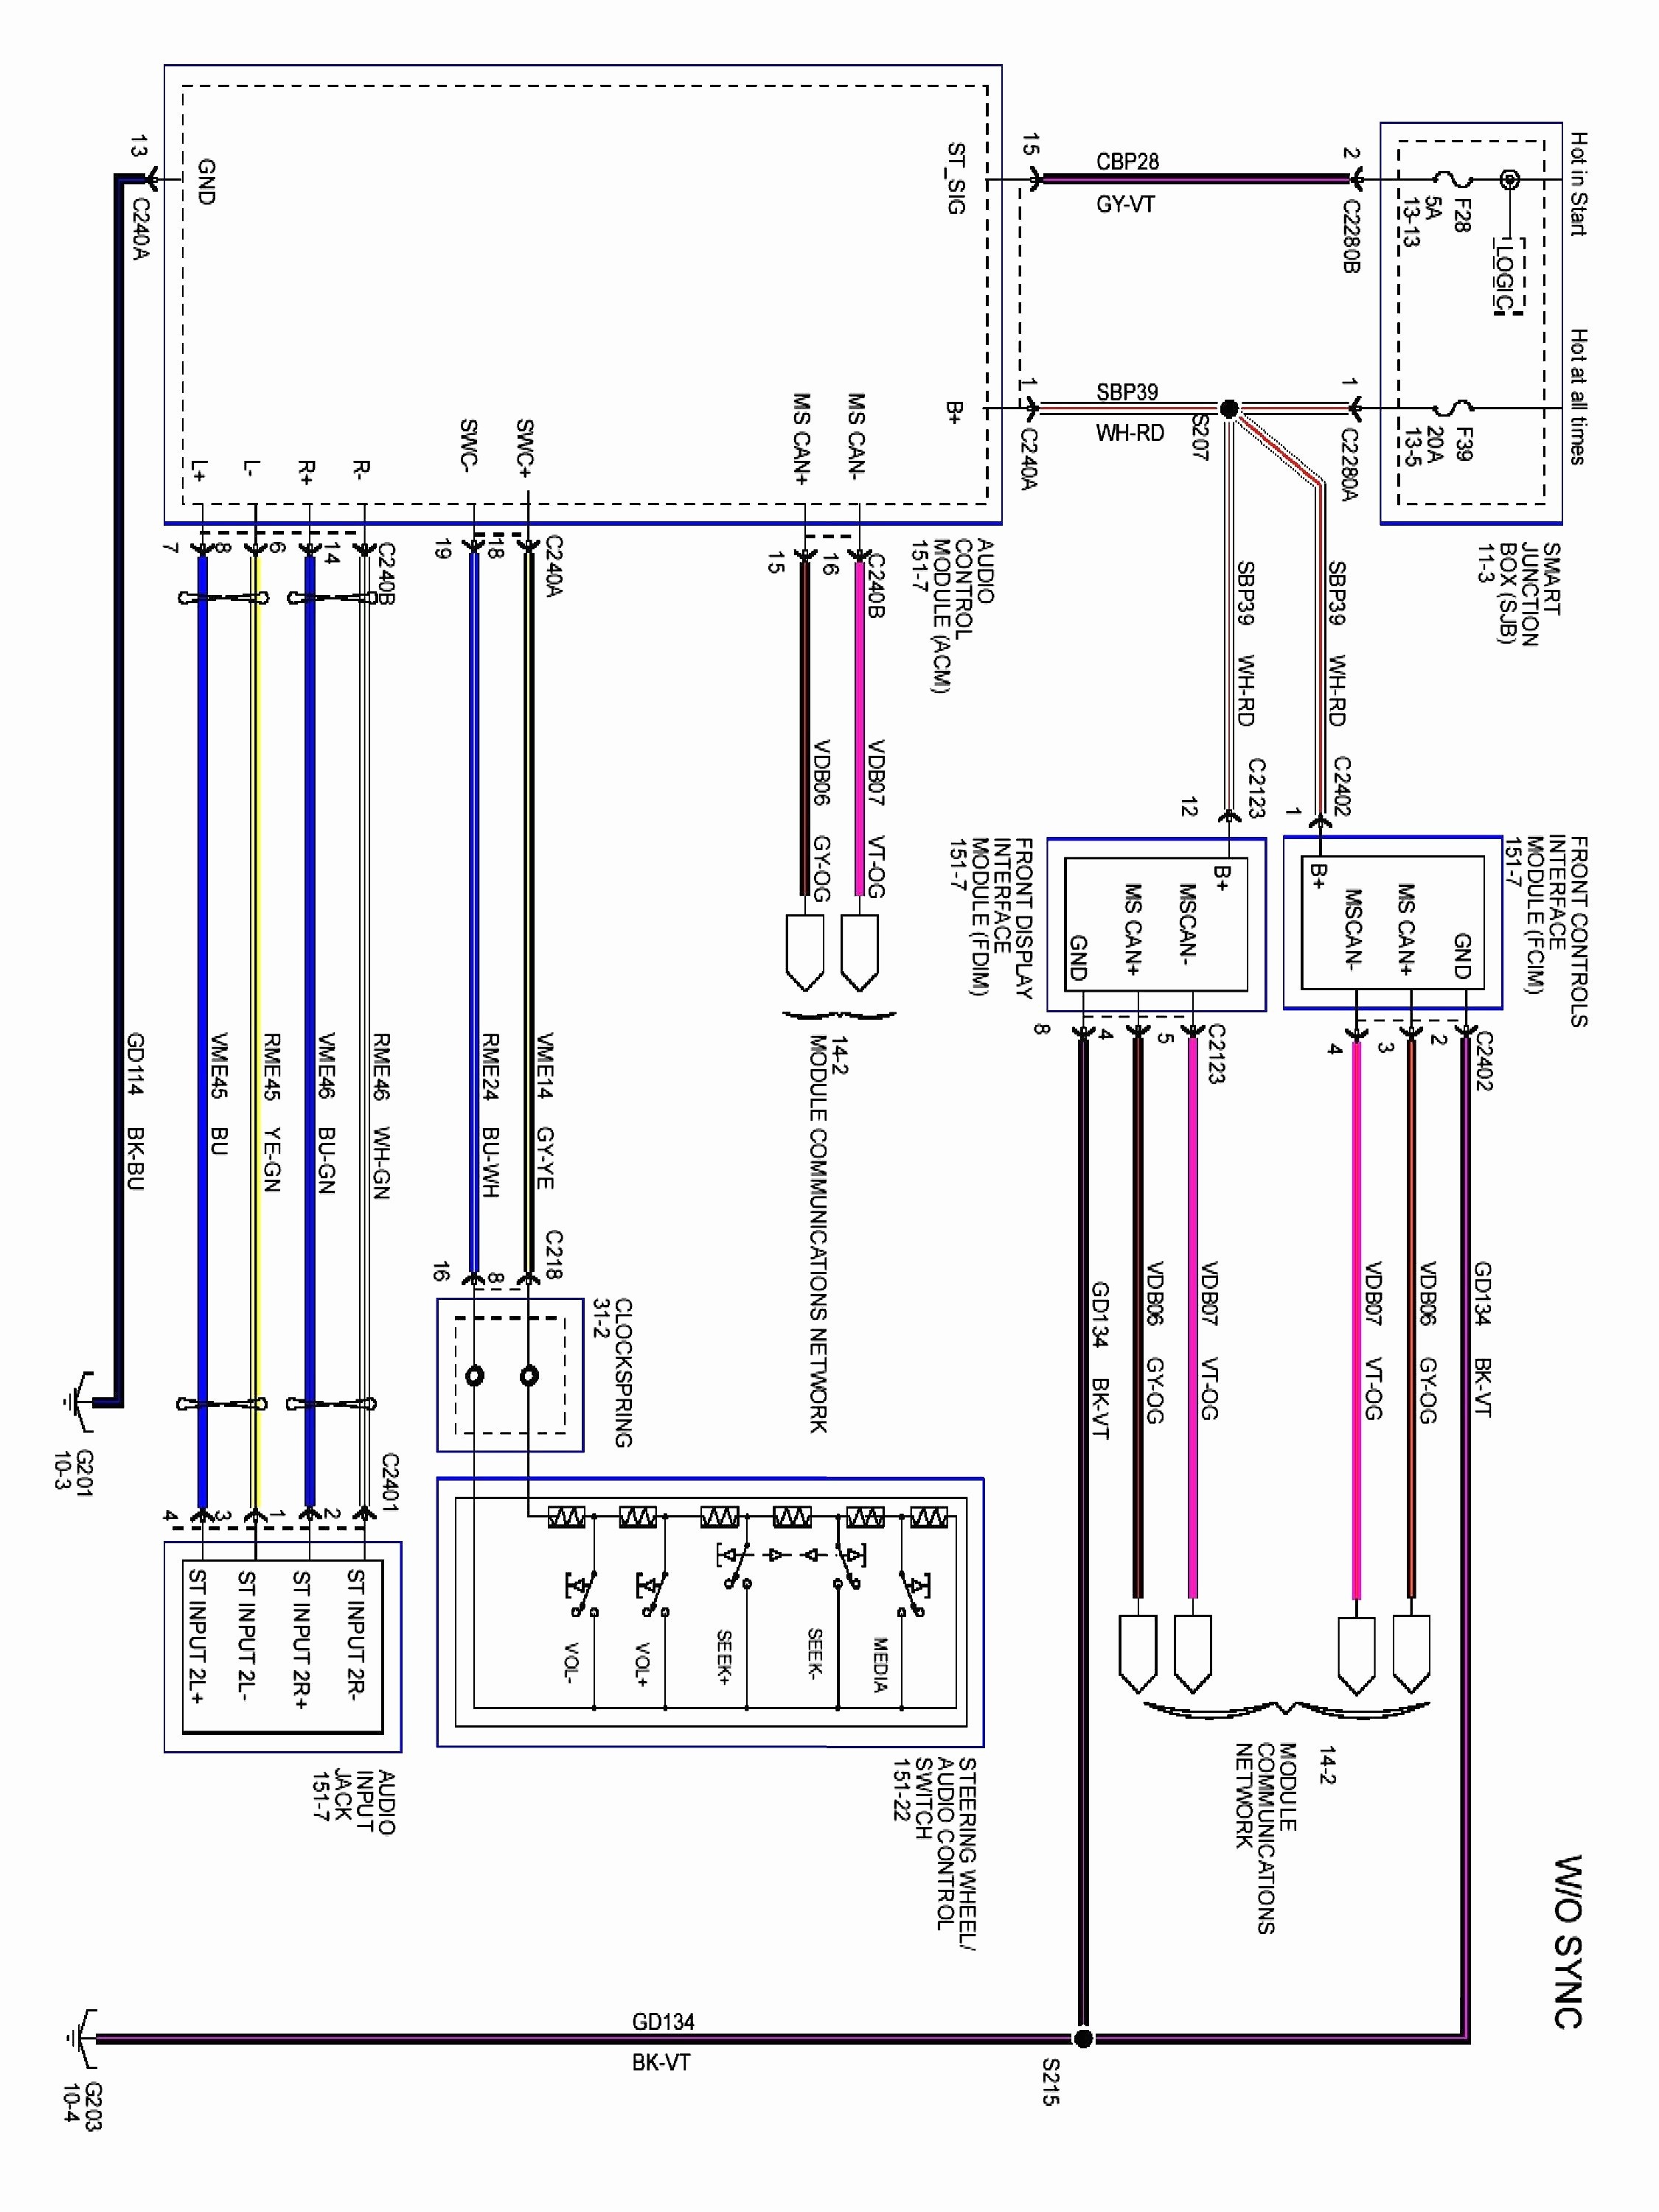 car sound wiring diagram Download Wiring Diagram For Amplifier Car Stereo Best Amplifier Wiring Diagram